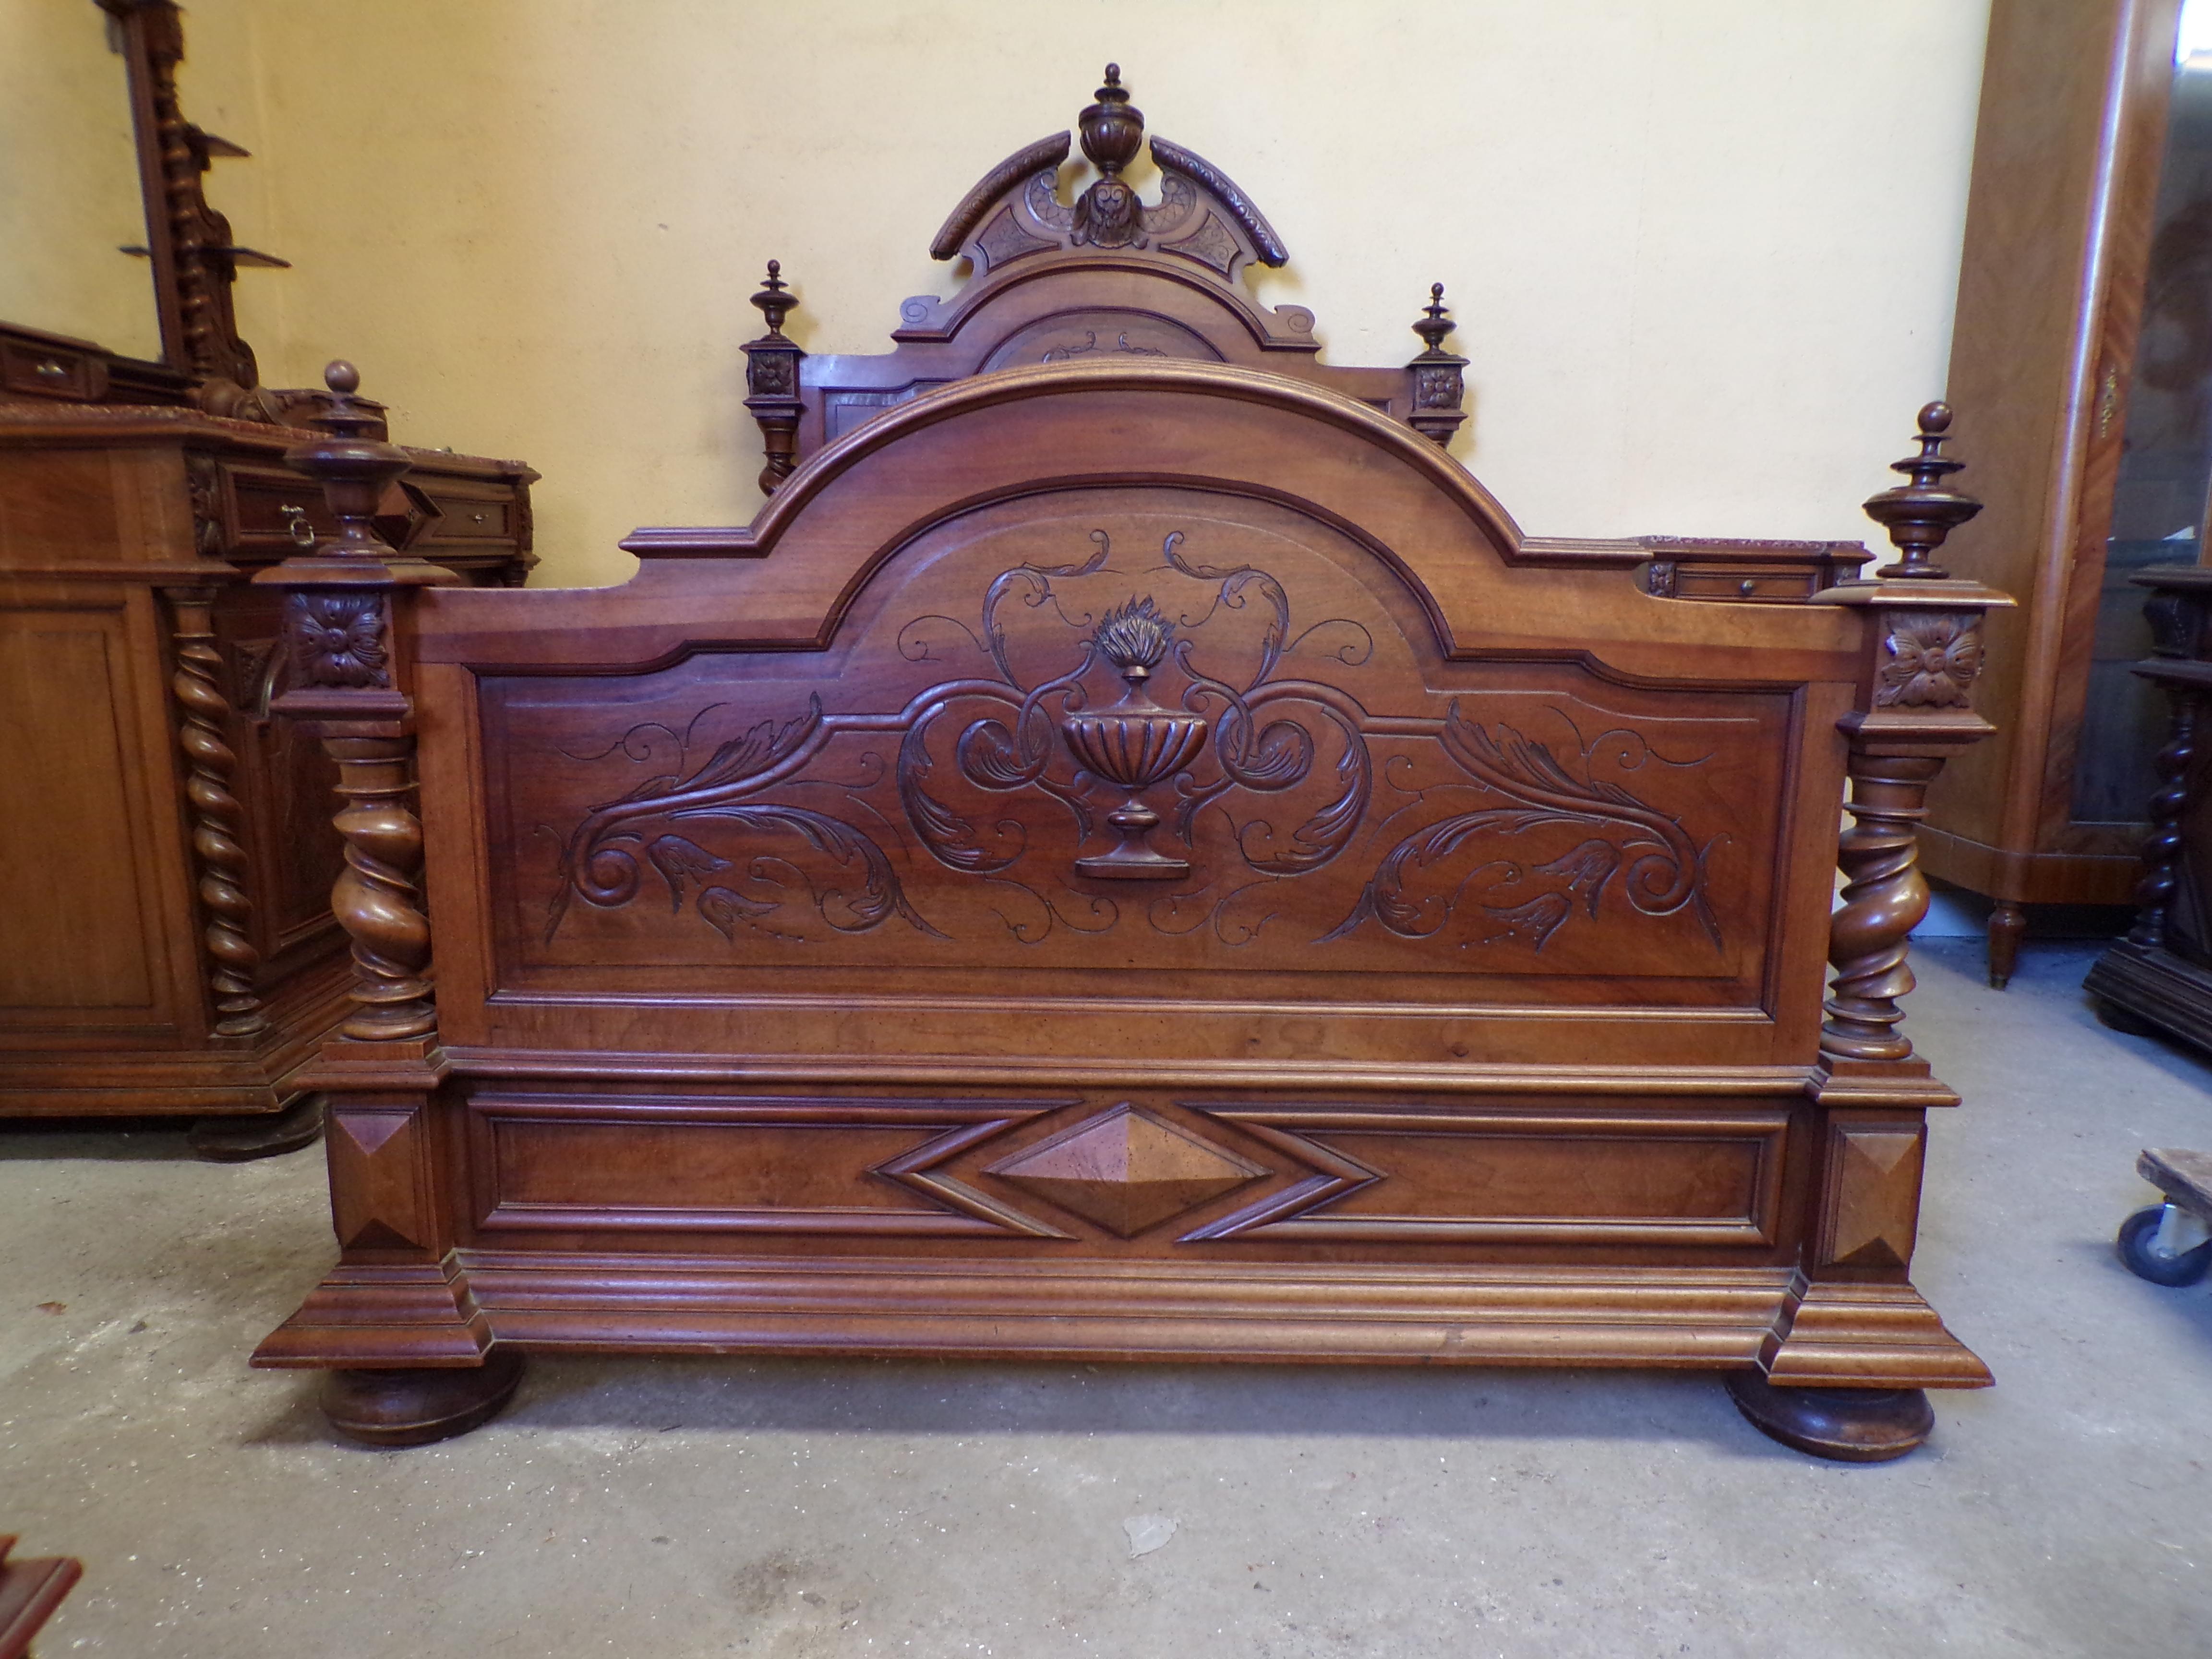 A fine quality hand carved increasingly rare all original Chateau bedroom suite in the Louis XIII style, circa 1890. Consisting of a grand bed , bedside cabinet, an imposing armoire and an impressive standing dressing chest. All in solid Walnut and